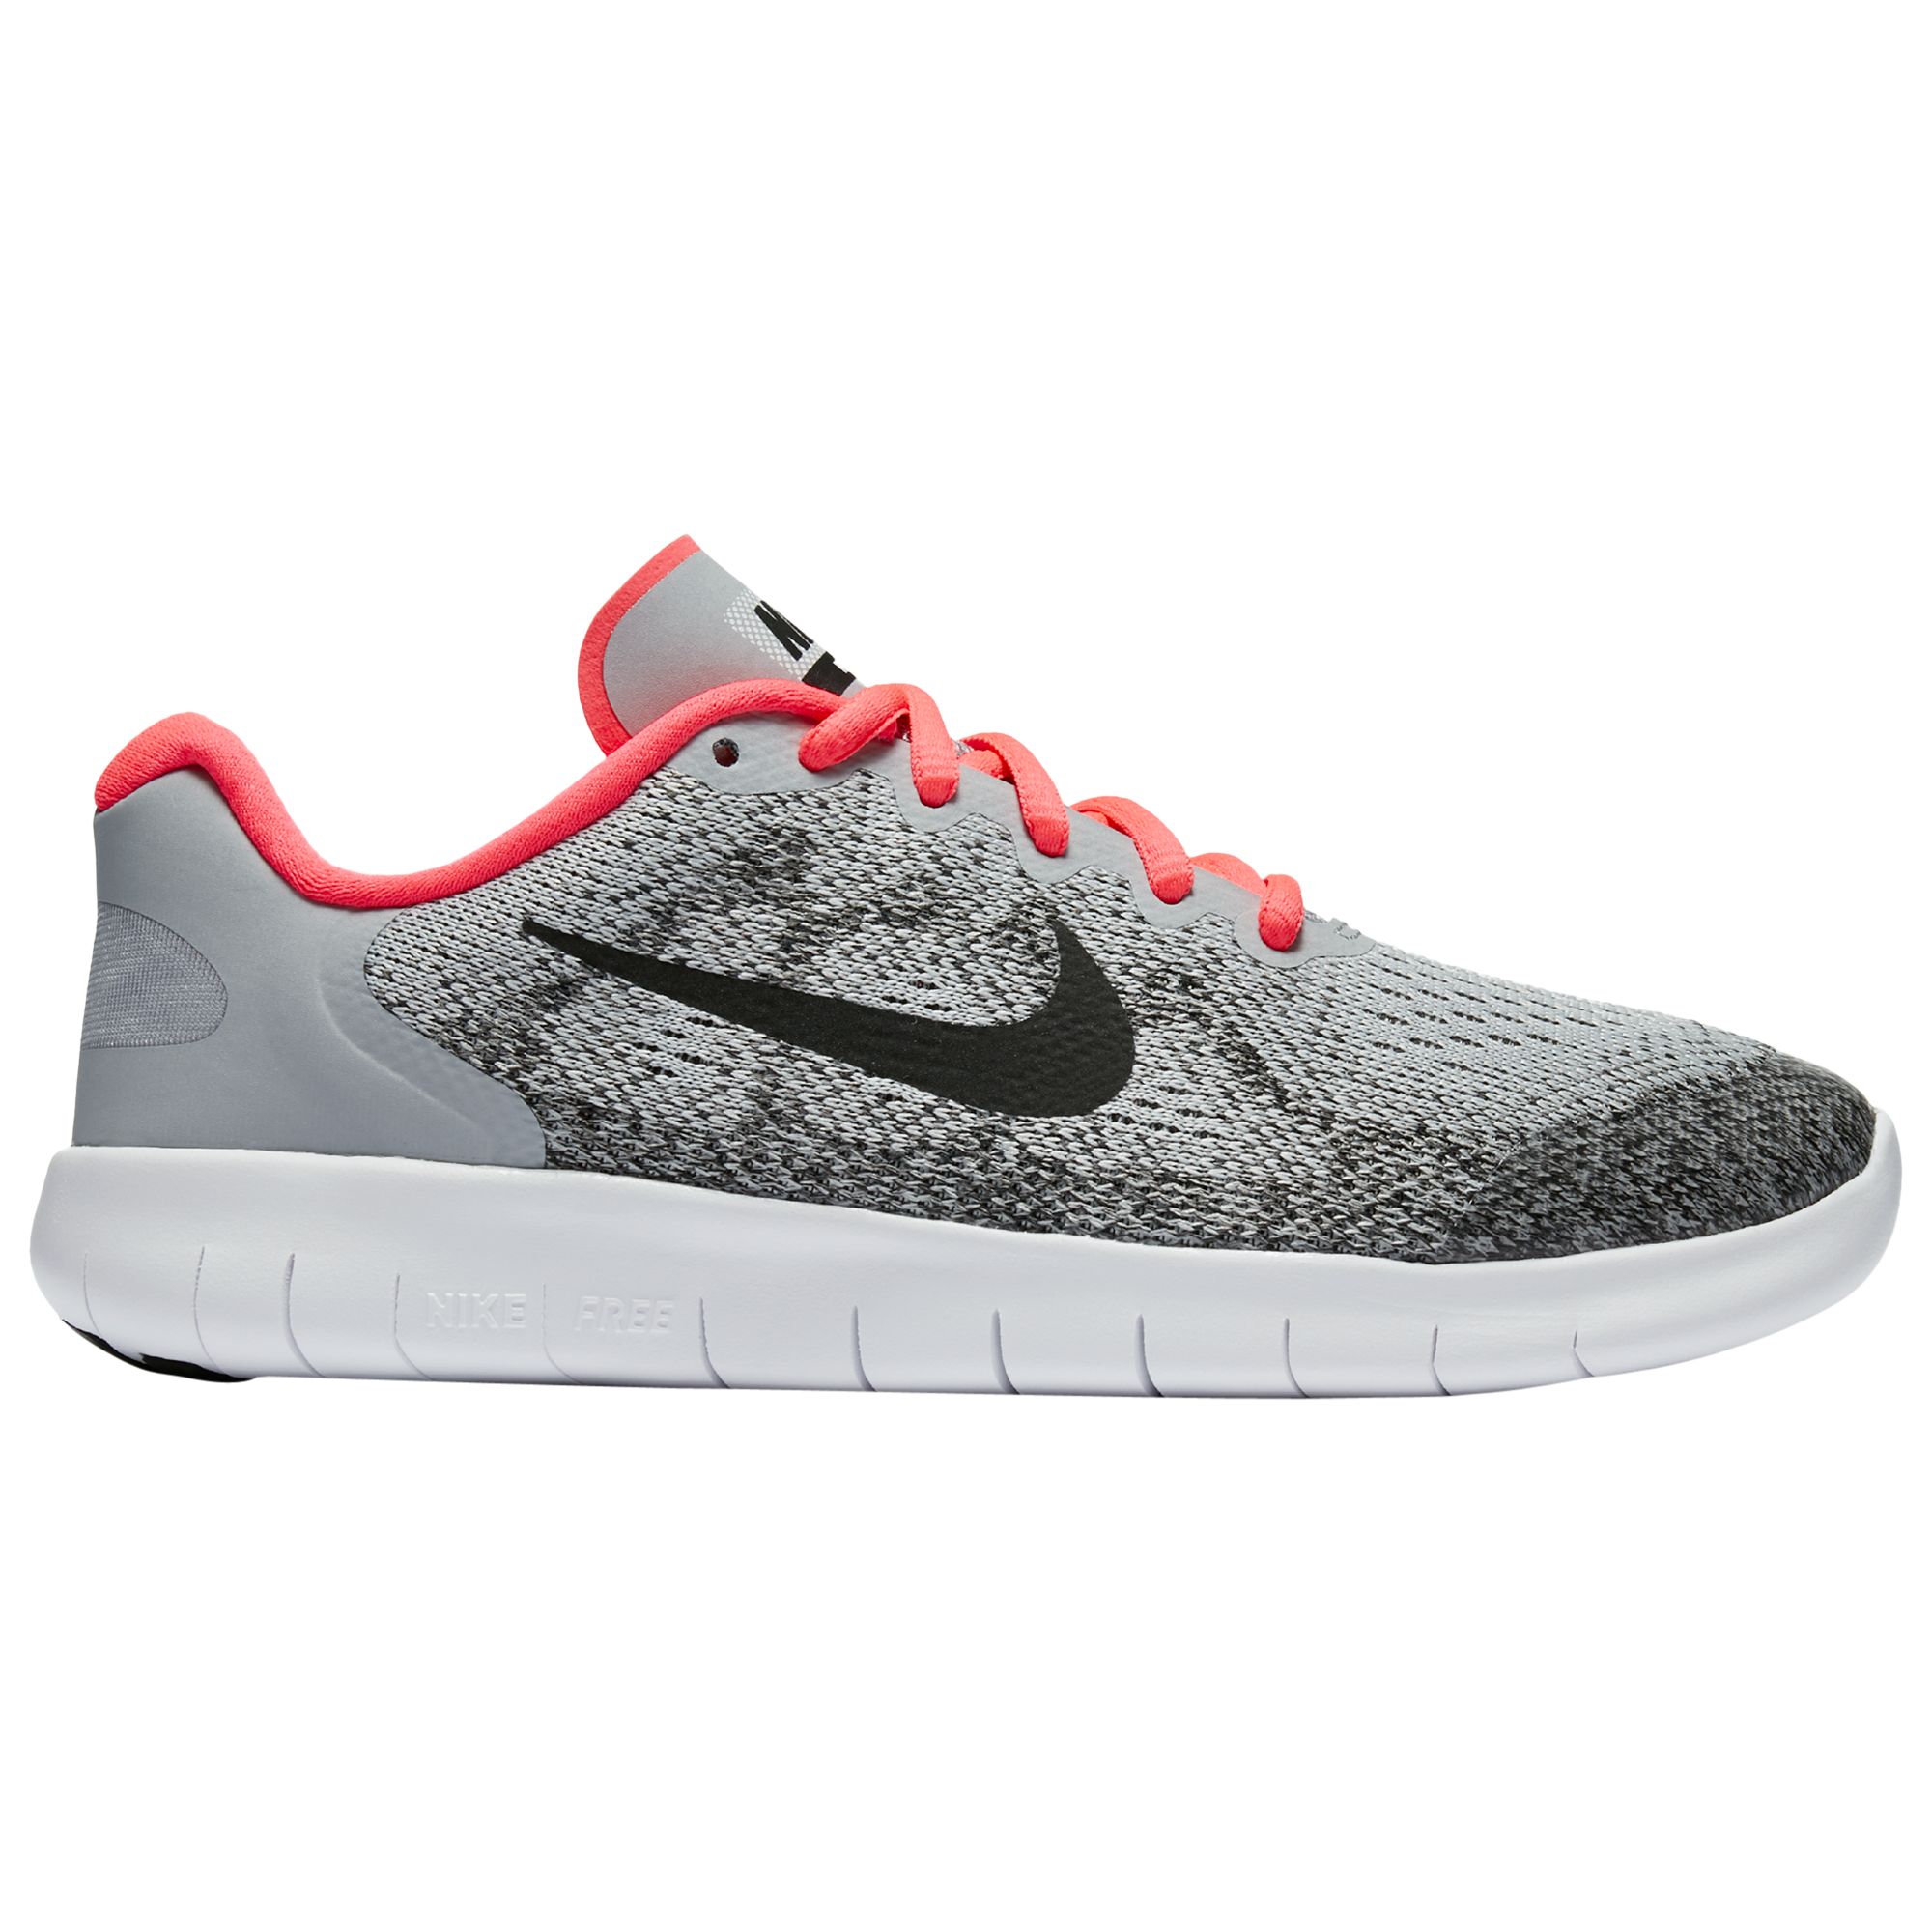 Nike Children's Free Run 2 Lace Up Trainers, Grey/Pink, 4